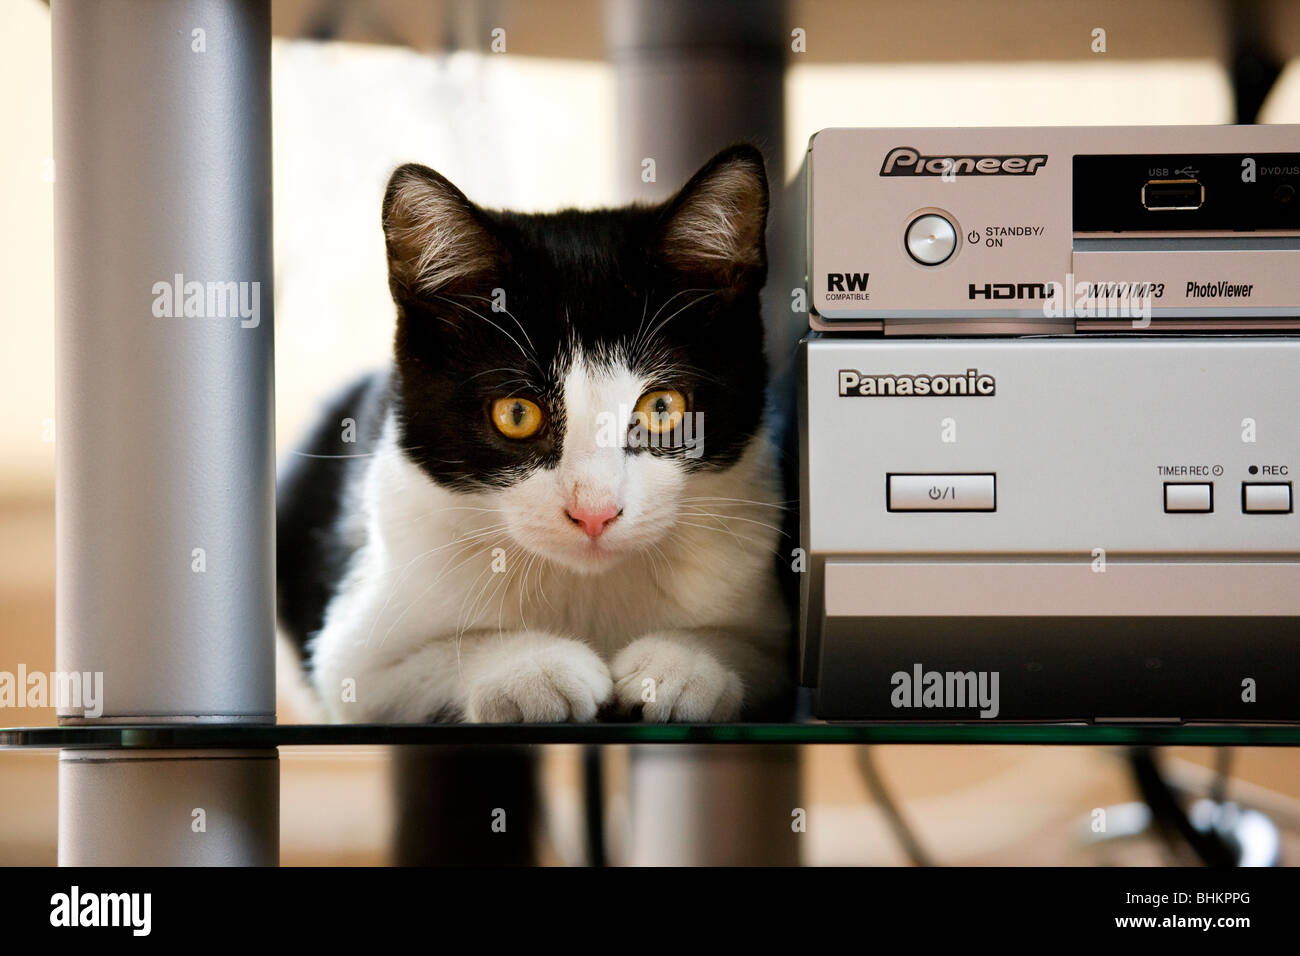 House cat (Felis catus) next to stereo equipment in living room Stock Photo